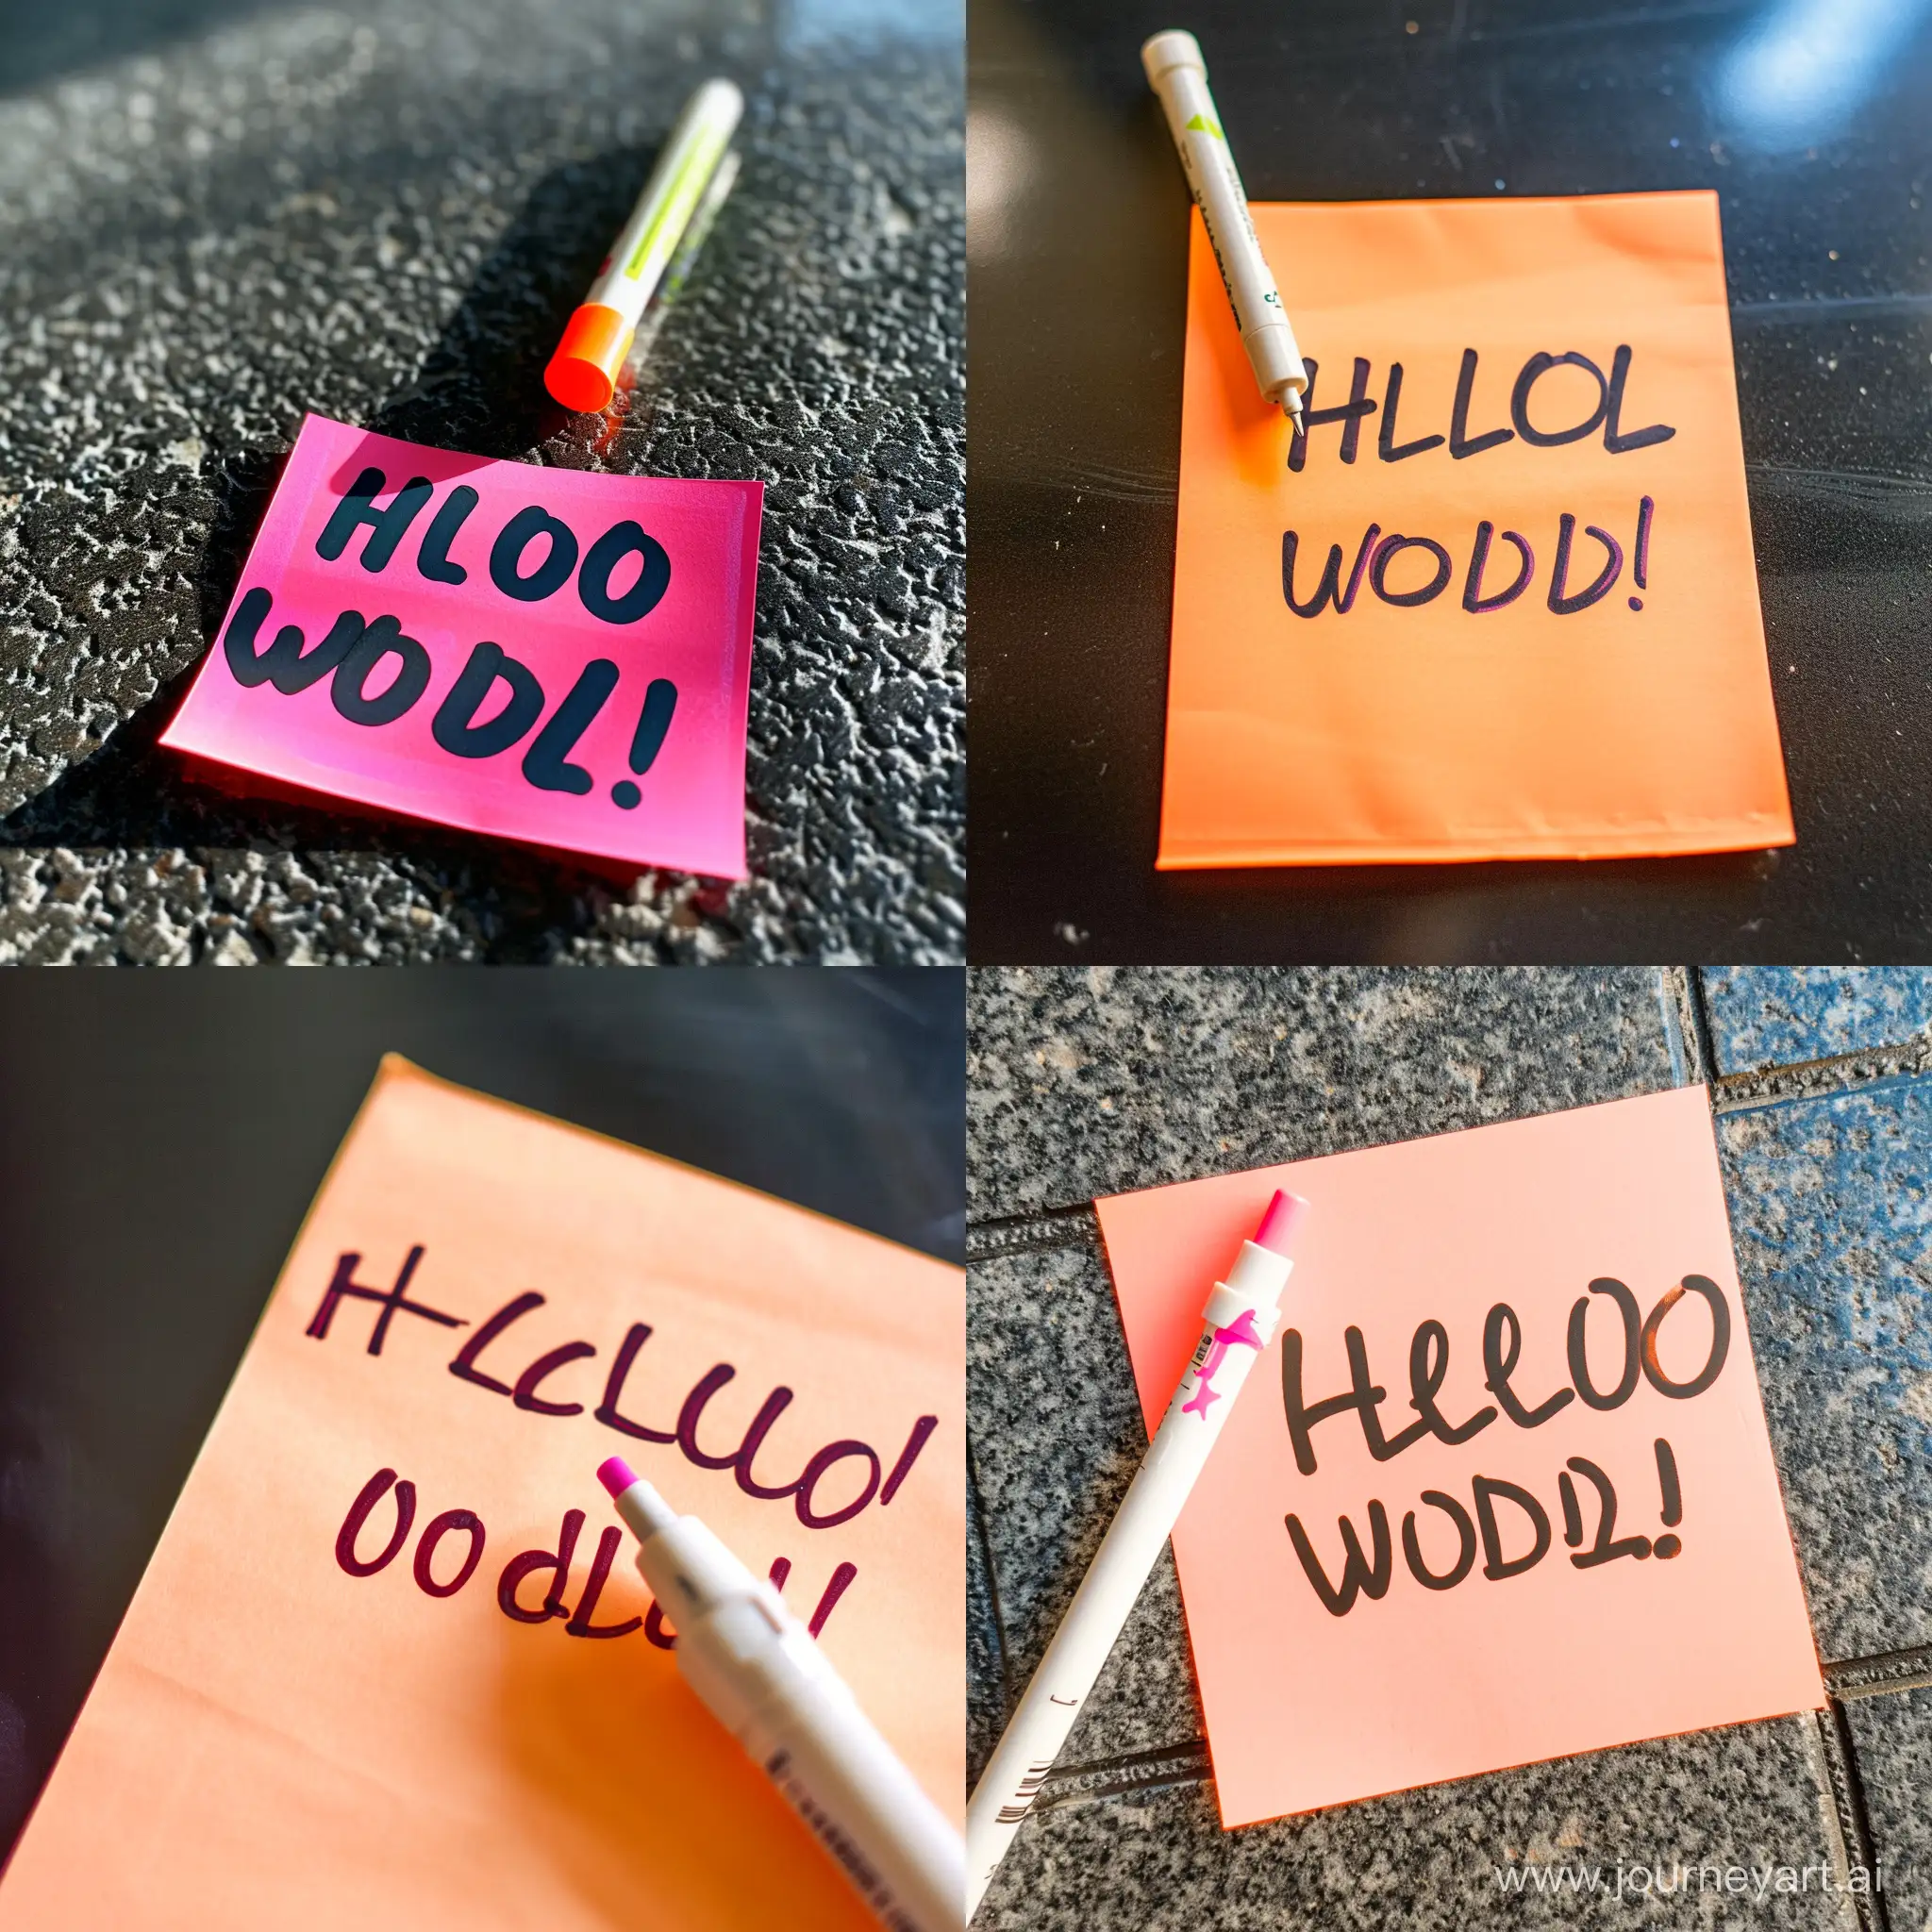 'a photo of the text "Hello World!" written with a marker on a sticky note